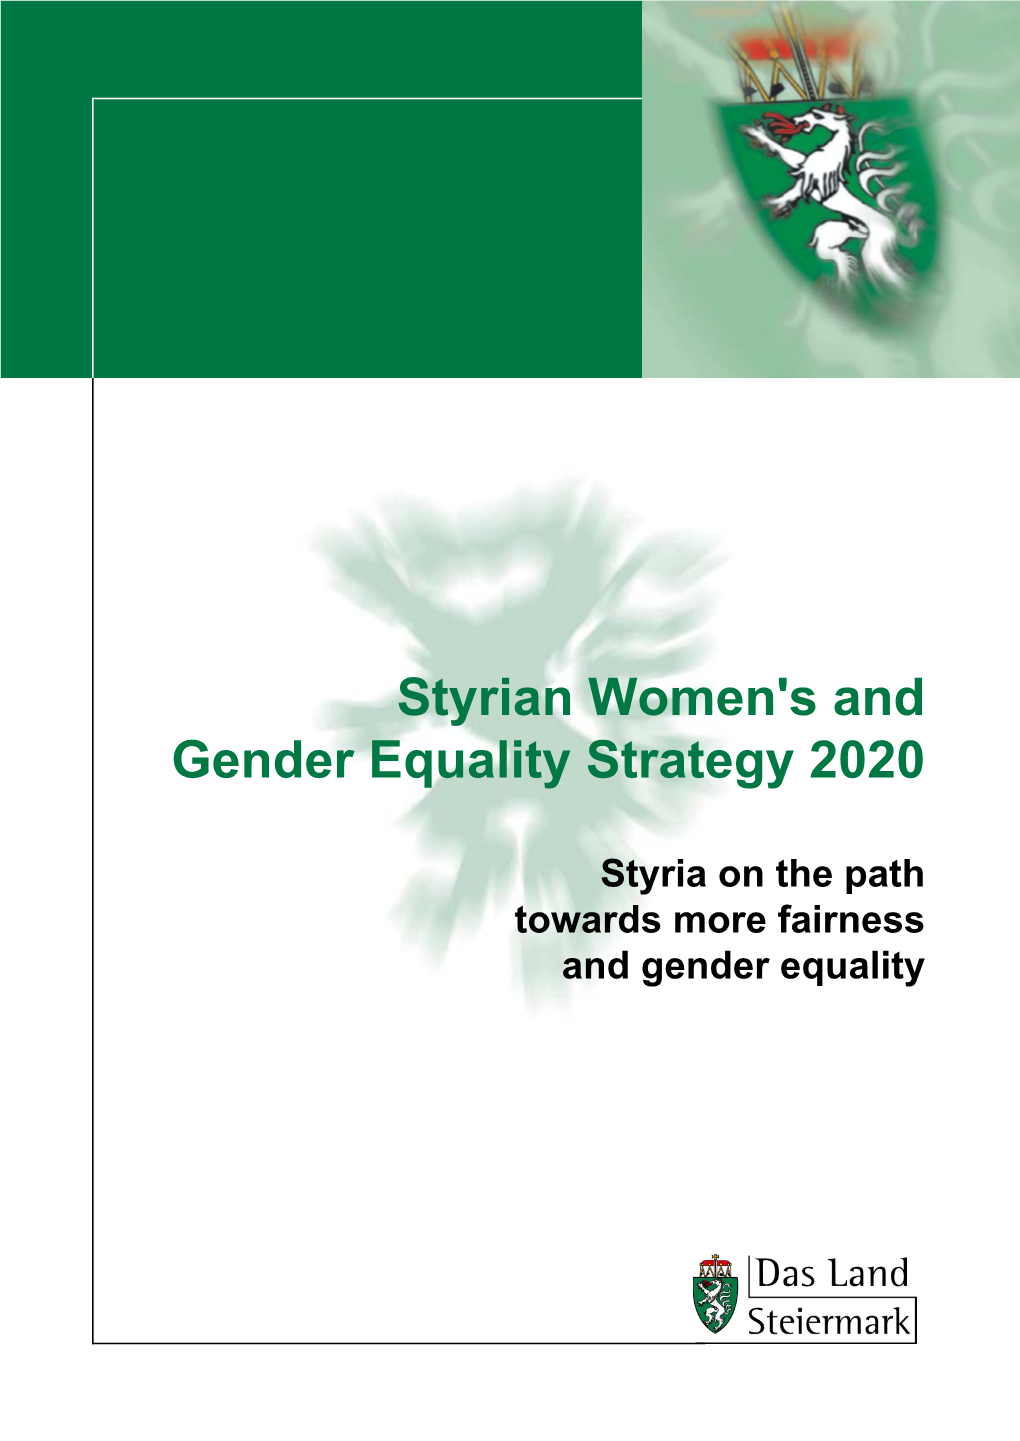 Styrian Women's and Gender Equality Strategy 2020